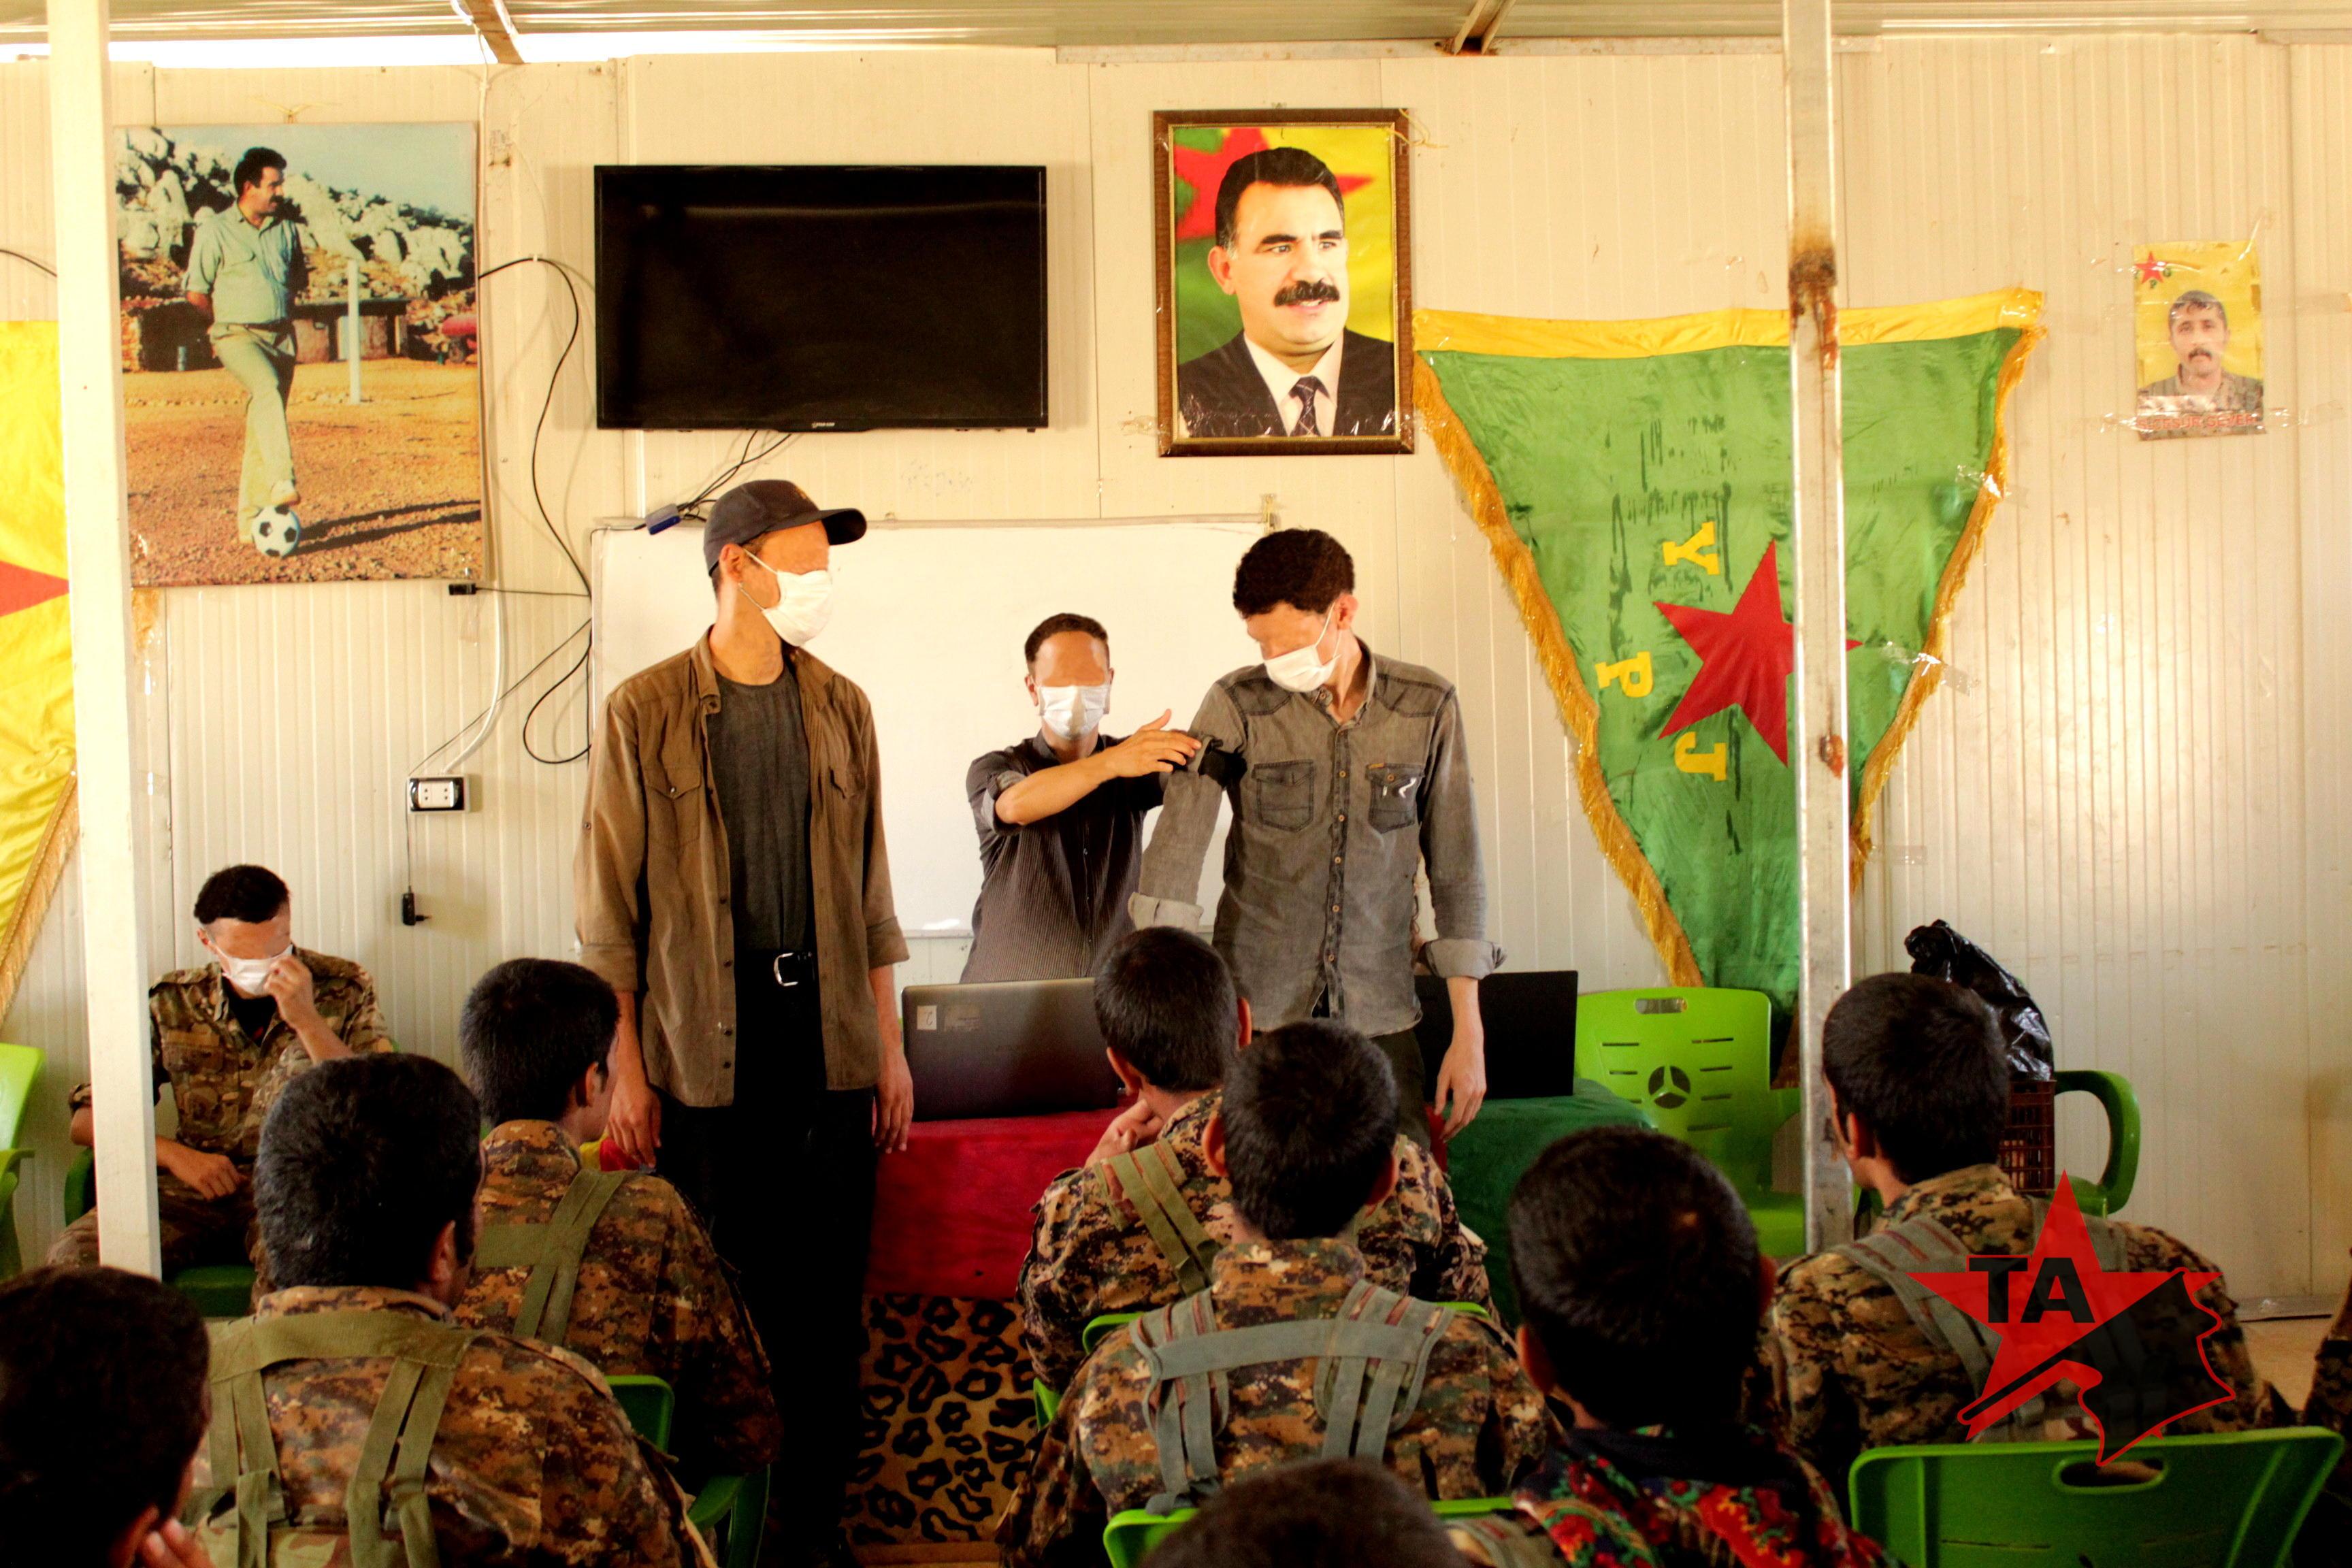 TA members educating YPG members on tourniquet use